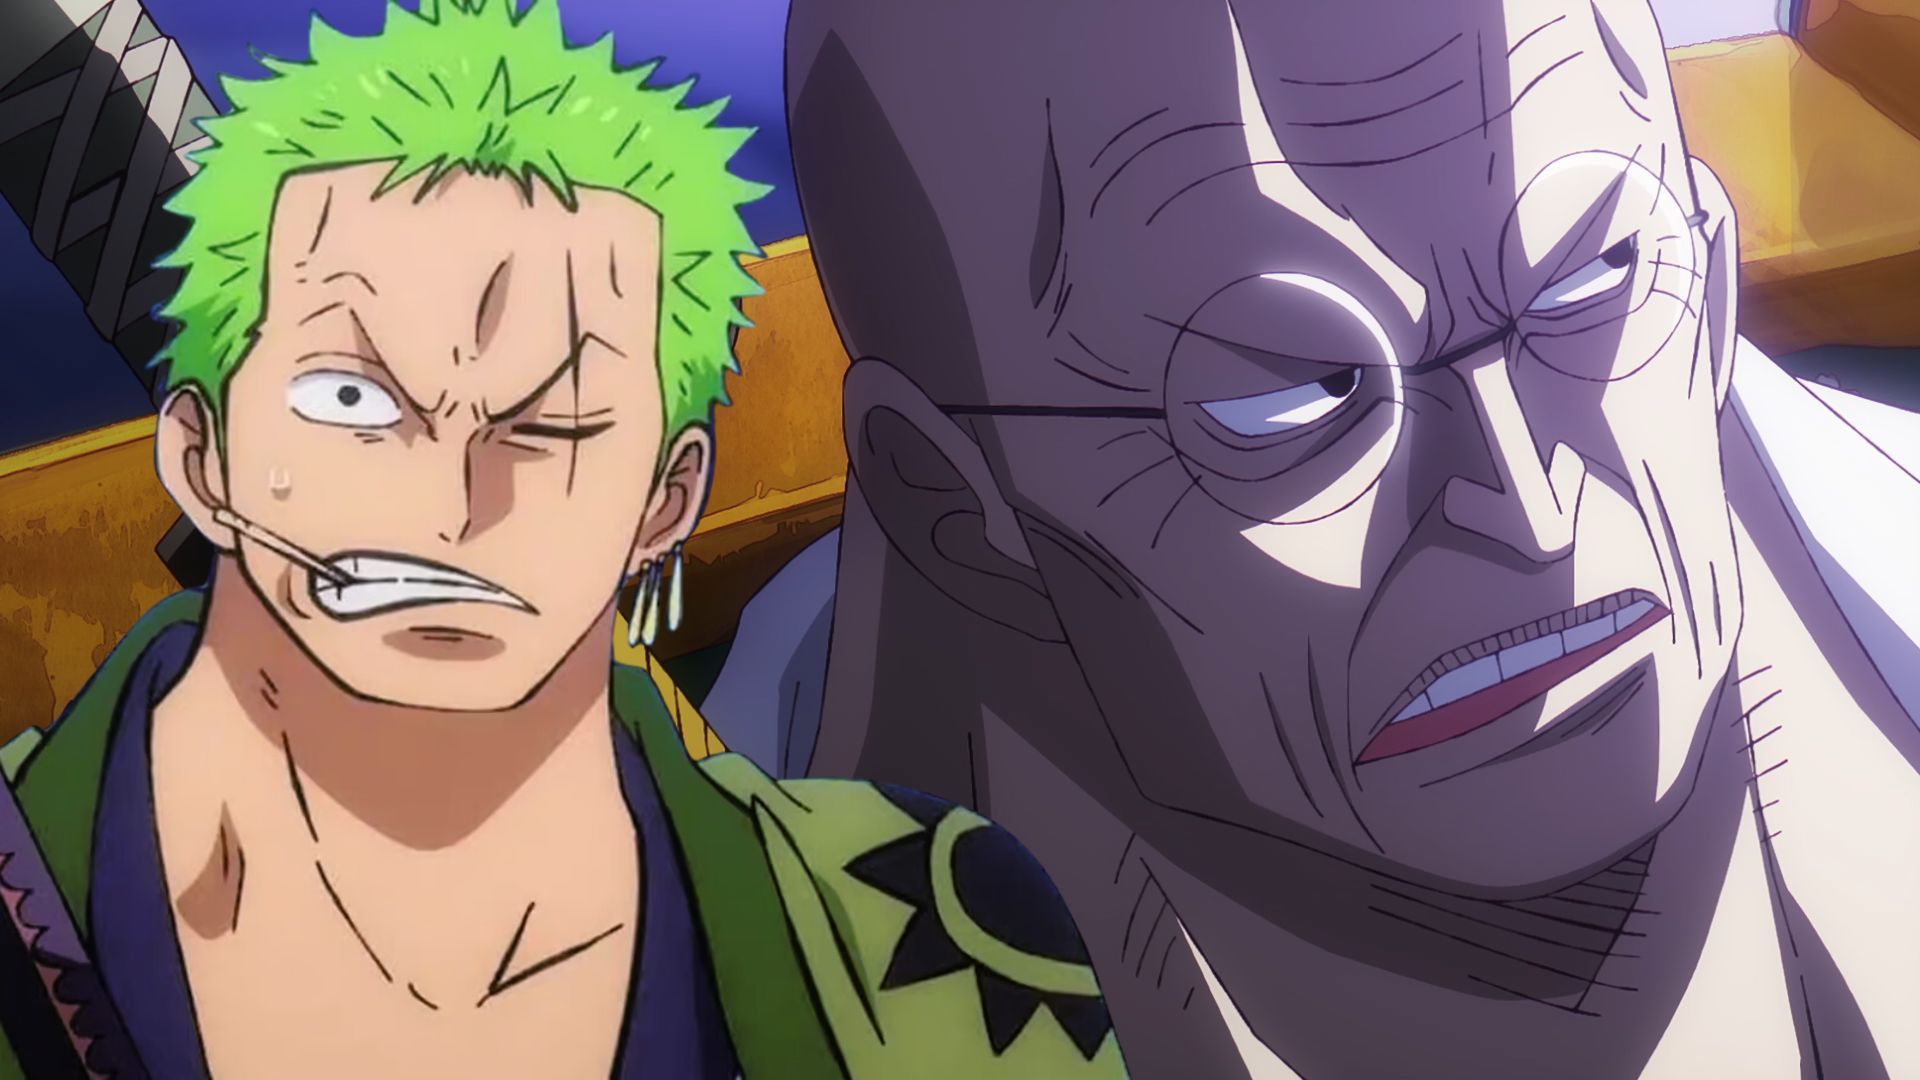 Zoro looking confused in his Wano outfit while Nusjuro is in the background